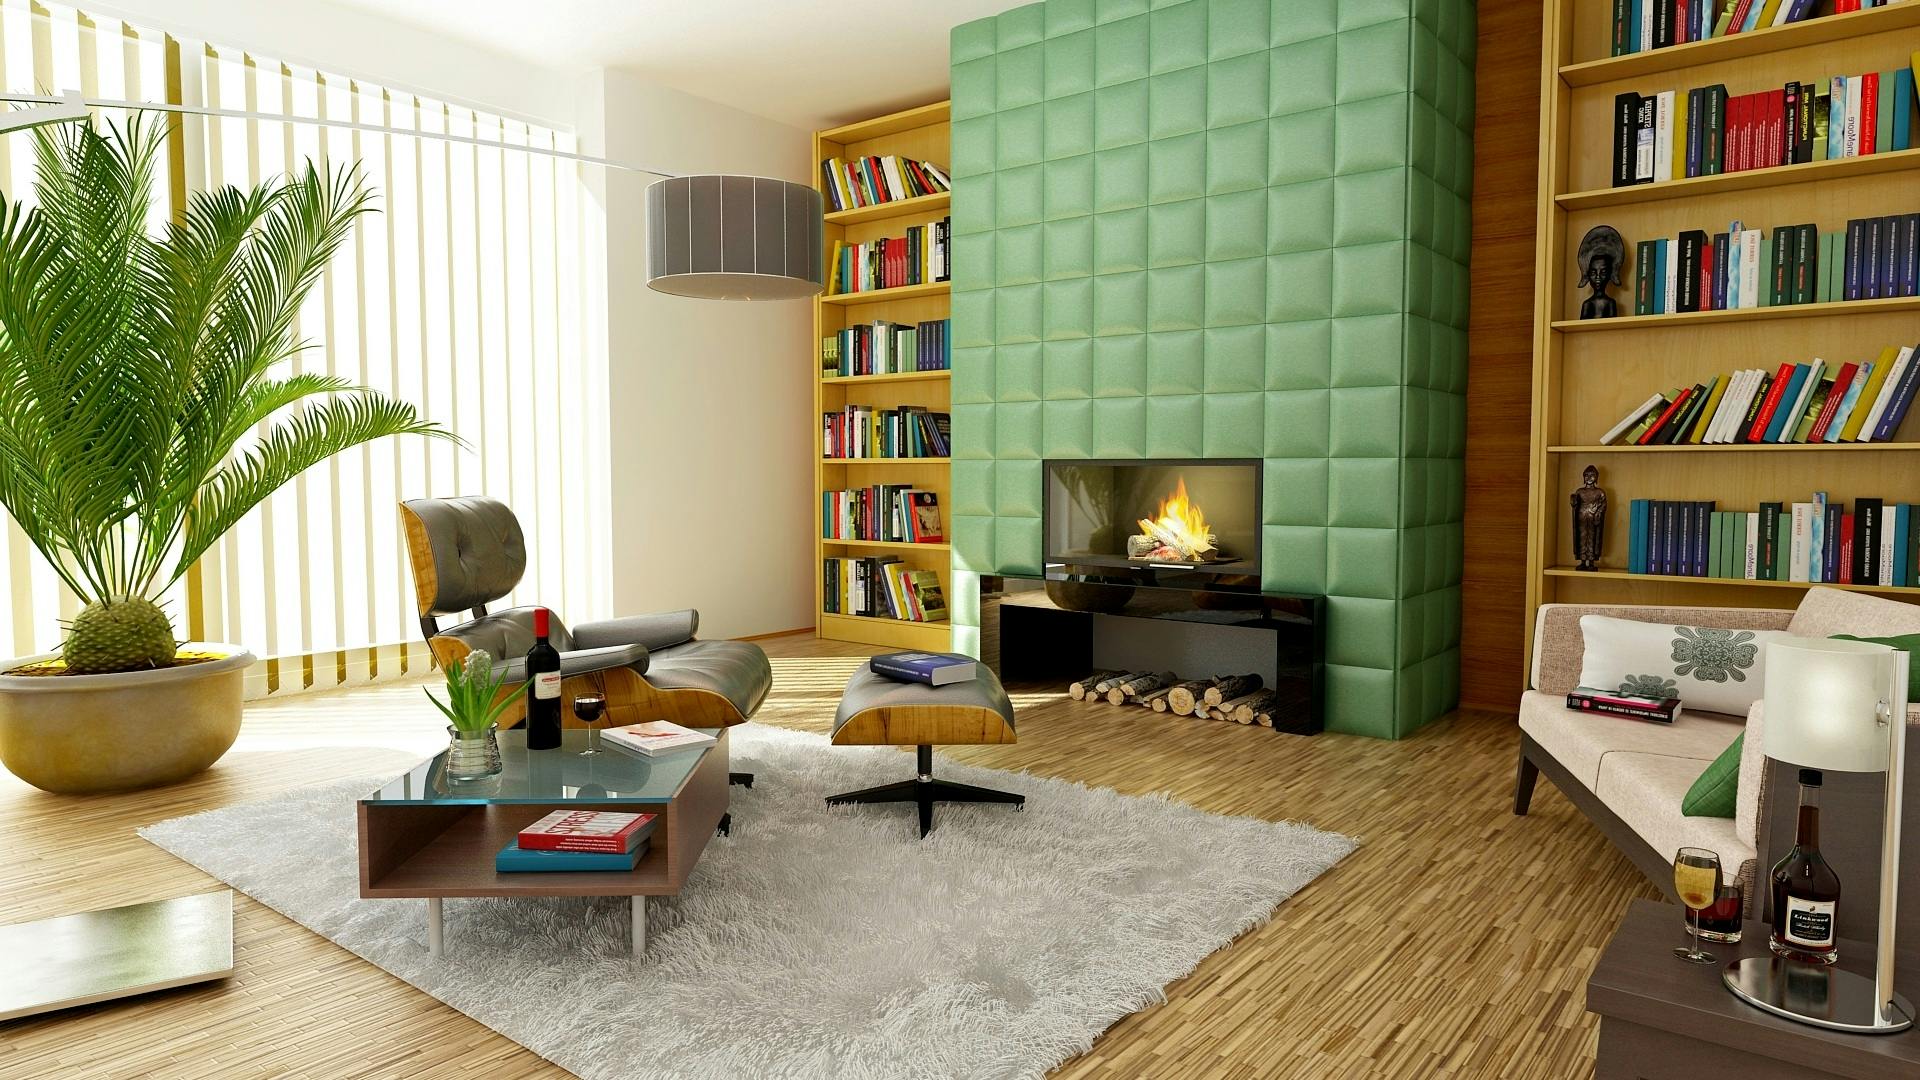 Green Ideas Plant and Furniture - Living Room Design